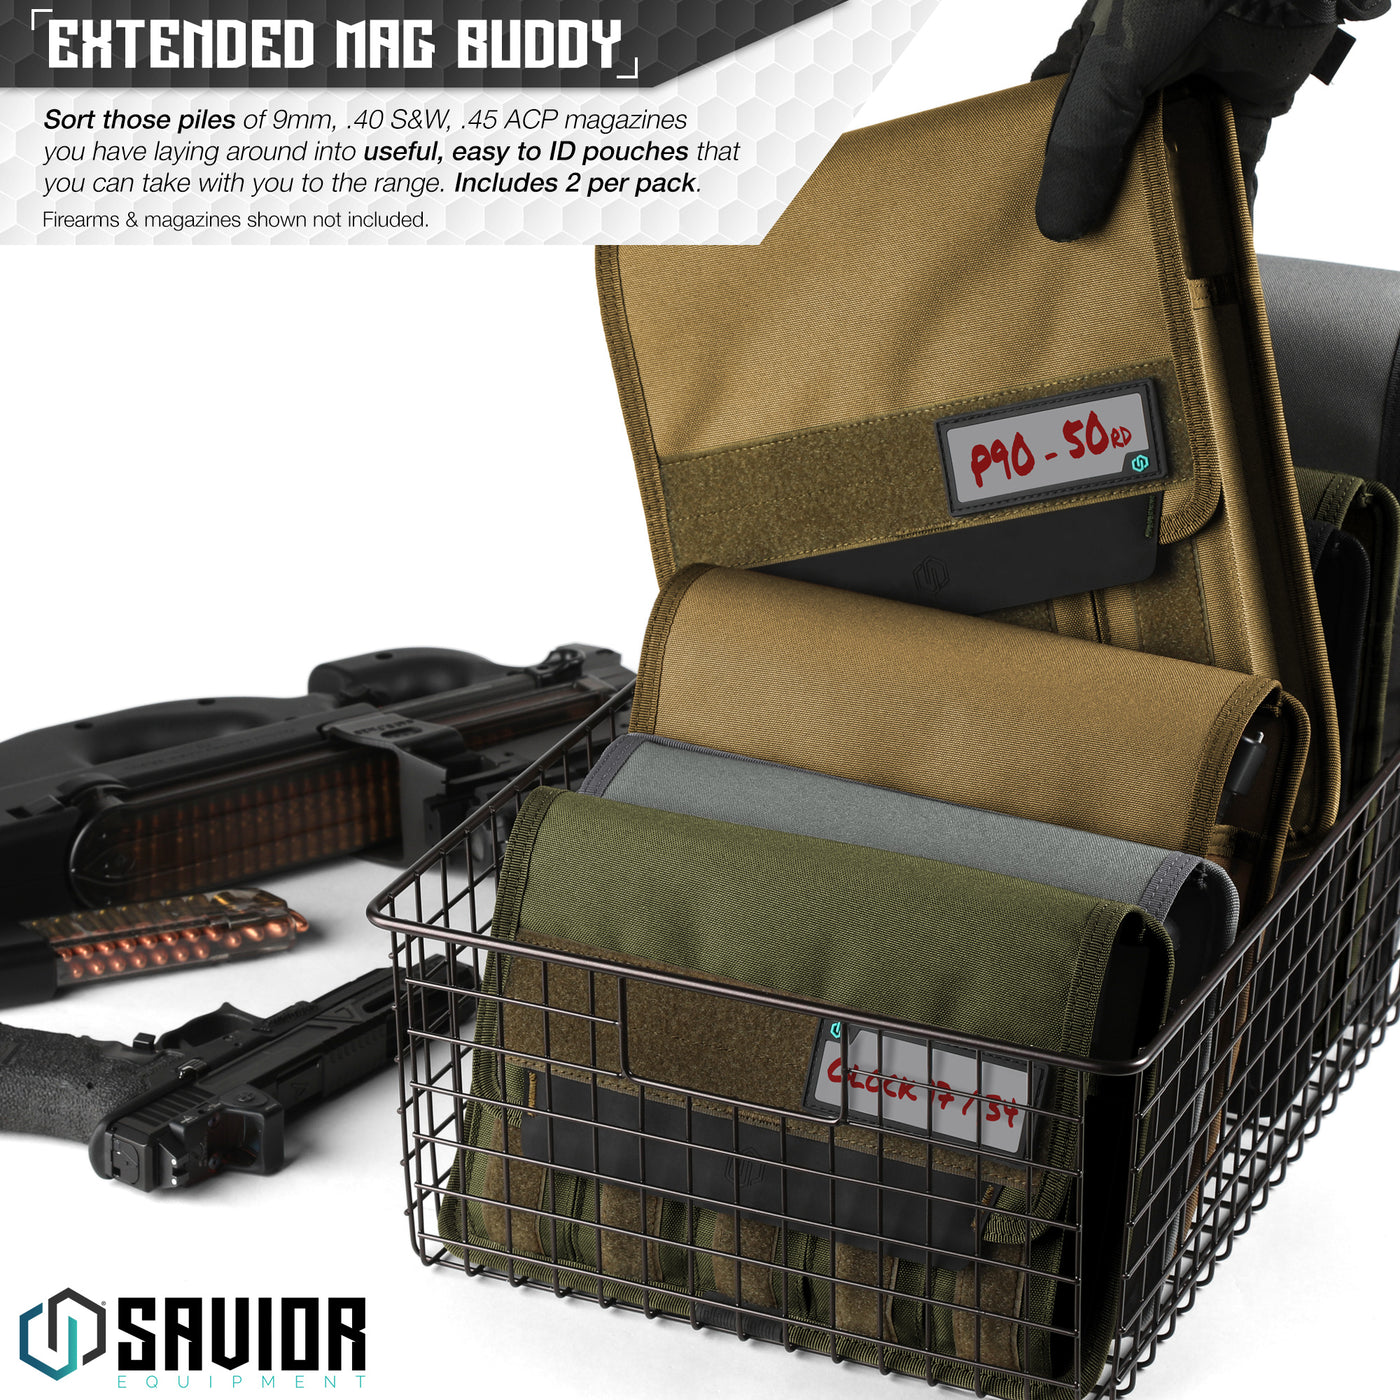 Extended Mag Buddy - Sort those piles of 9mm, .40 S&W, .45 ACP magazines you have laying around into useful, easy to ID pouches that you can take with you to the range. Includes 2 per pack. Firearms & magazines shown not included.